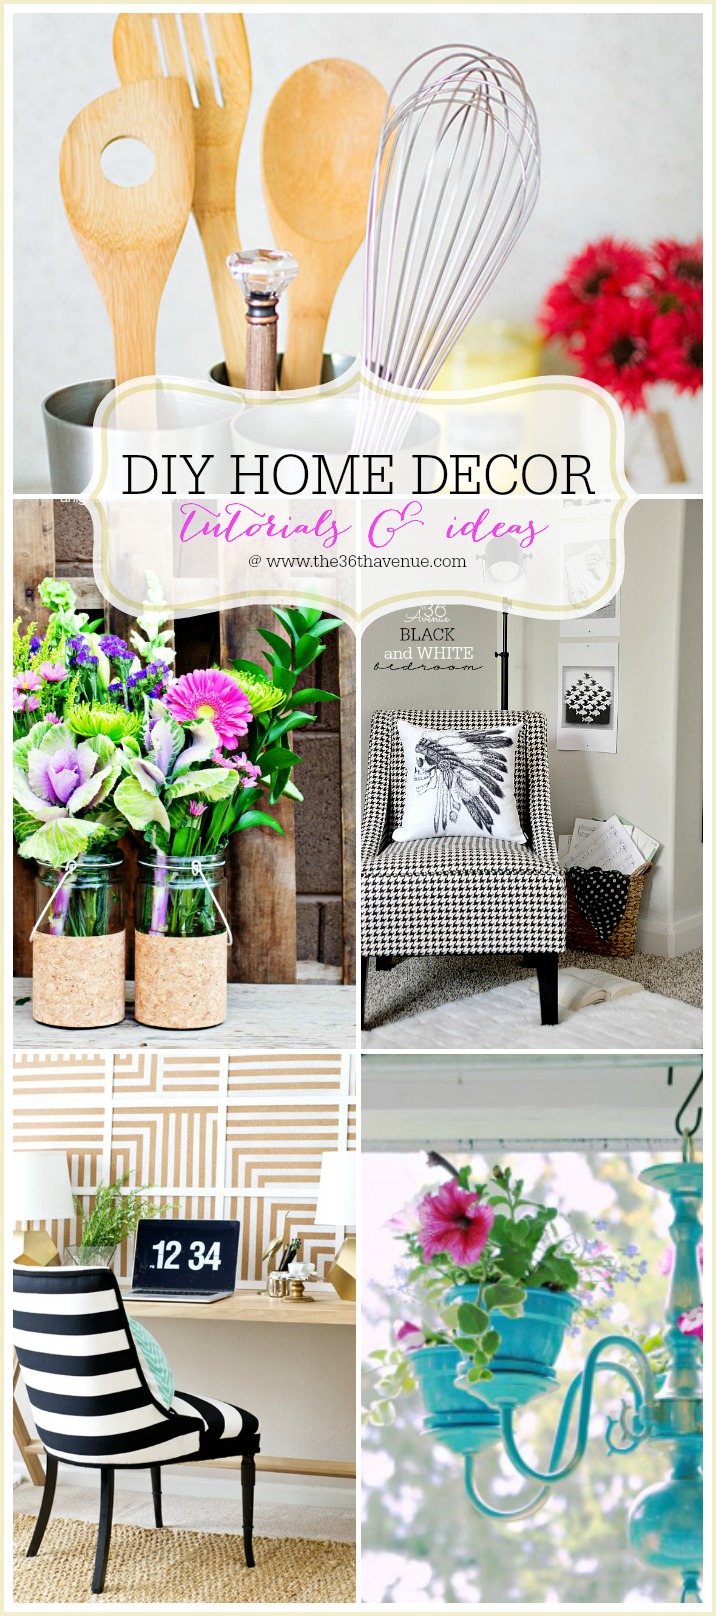 The 36th AVENUE | Home Decor DIY Projects | The 36th AVENUE